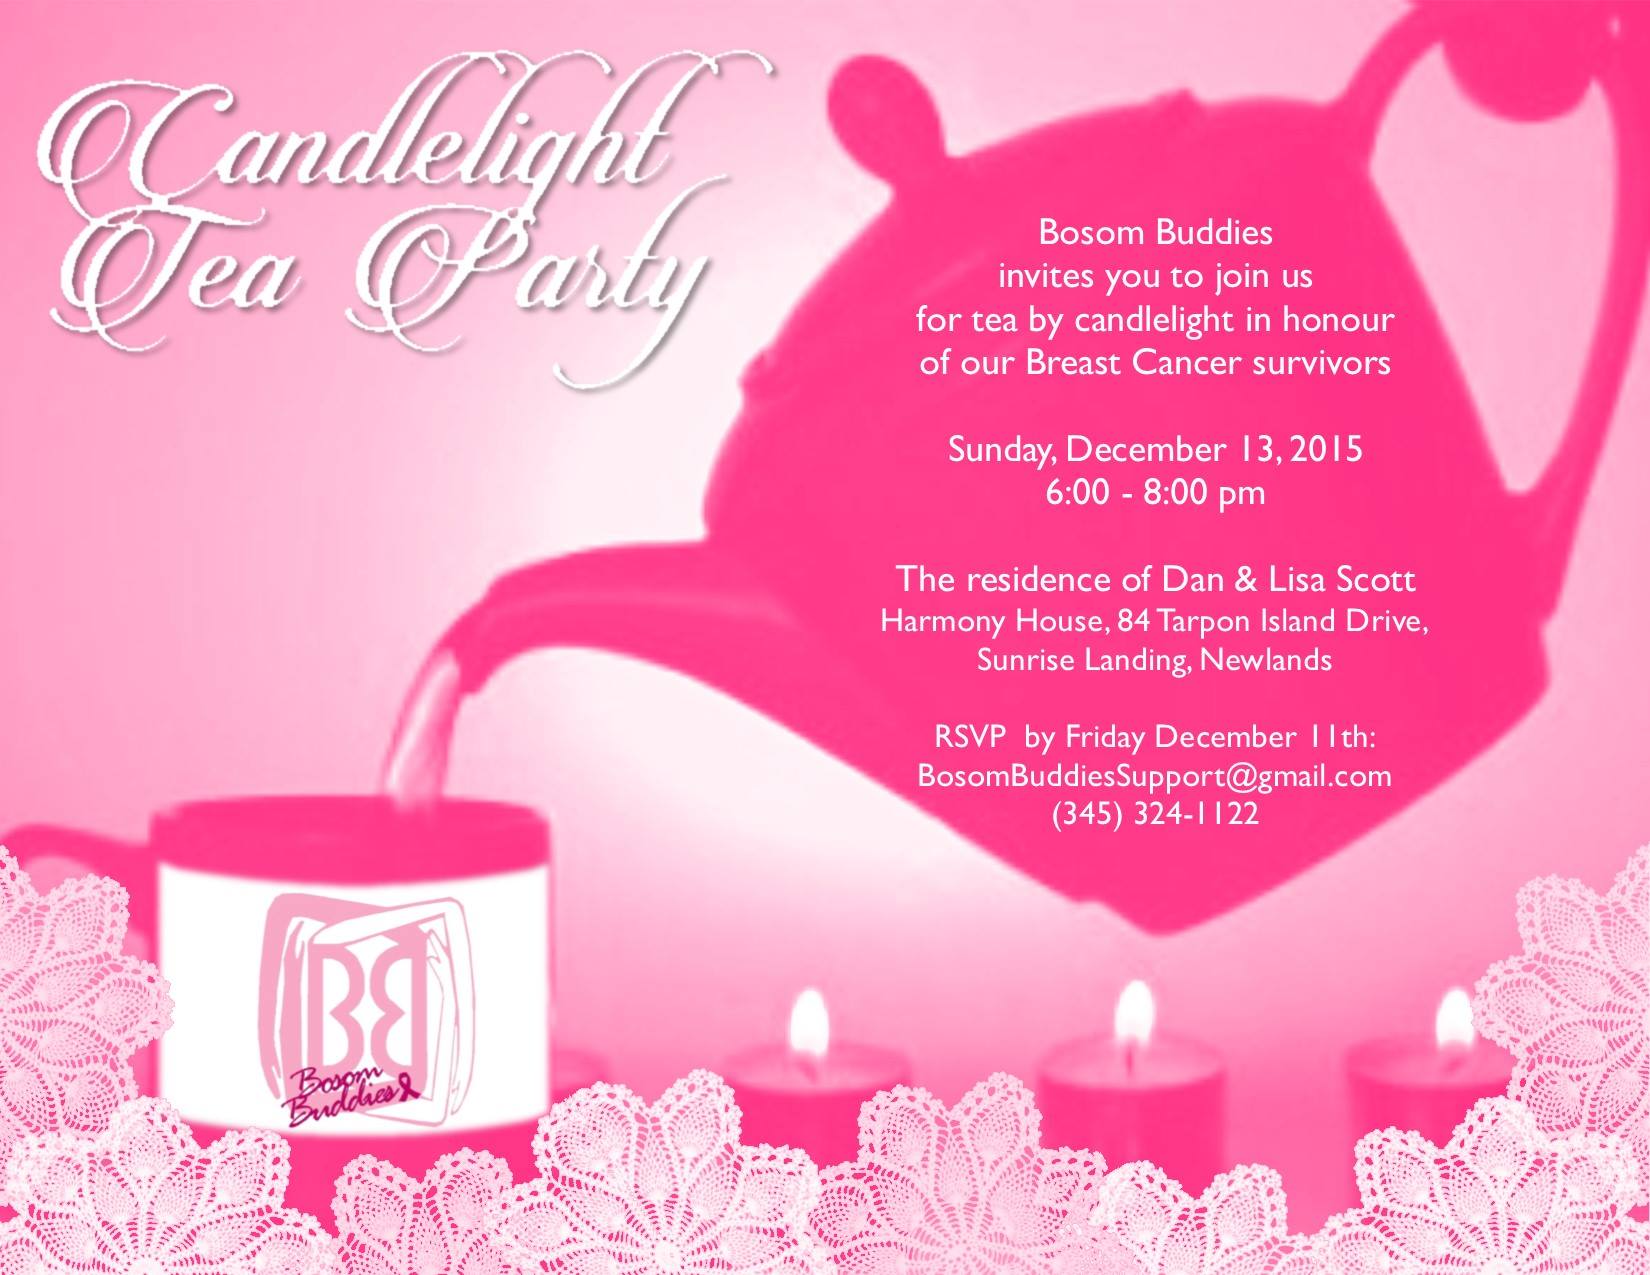 Candlelight Tea Party 2015